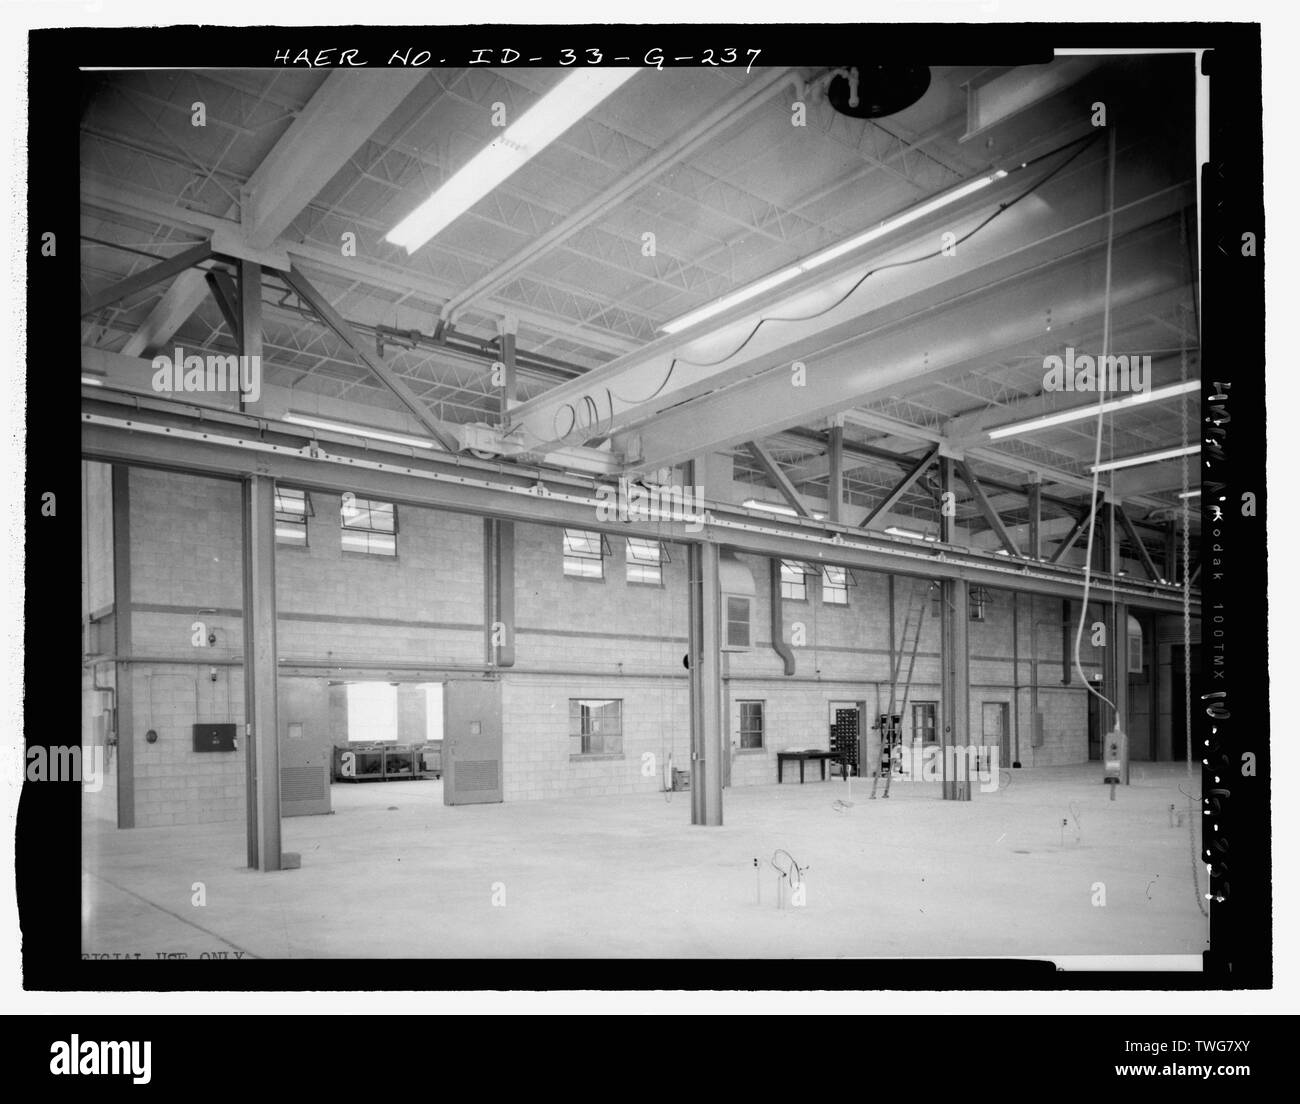 REACTOR SERVICE BUILDING, TRA-635, INTERIOR. CAMERA FACES NORTHWEST TOWARDS INTERIOR WALL ENCLOSING STORAGE AND OFFICE SPACE ALONG THE WEST SIDE. AT RIGHT EDGE IS DOOR TO MTR BUILDING. FROM RIGHT TO LEFT, SPACE WAS PLANNED FOR A LOCKER ROOM, MTR ISSUE ROOM, AND STORAGE AREAS AND RELATED OFFICES. NOTE SECOND MEZZANINE FLOOR ABOVE. INL NEGATIVE NO. 10227.; Unknown Photographer, 3-23-1954 - Idaho National Engineering Laboratory, Test Reactor Area, Materials and Engineering Test Reactors, Scoville, Butte County, ID Stock Photo